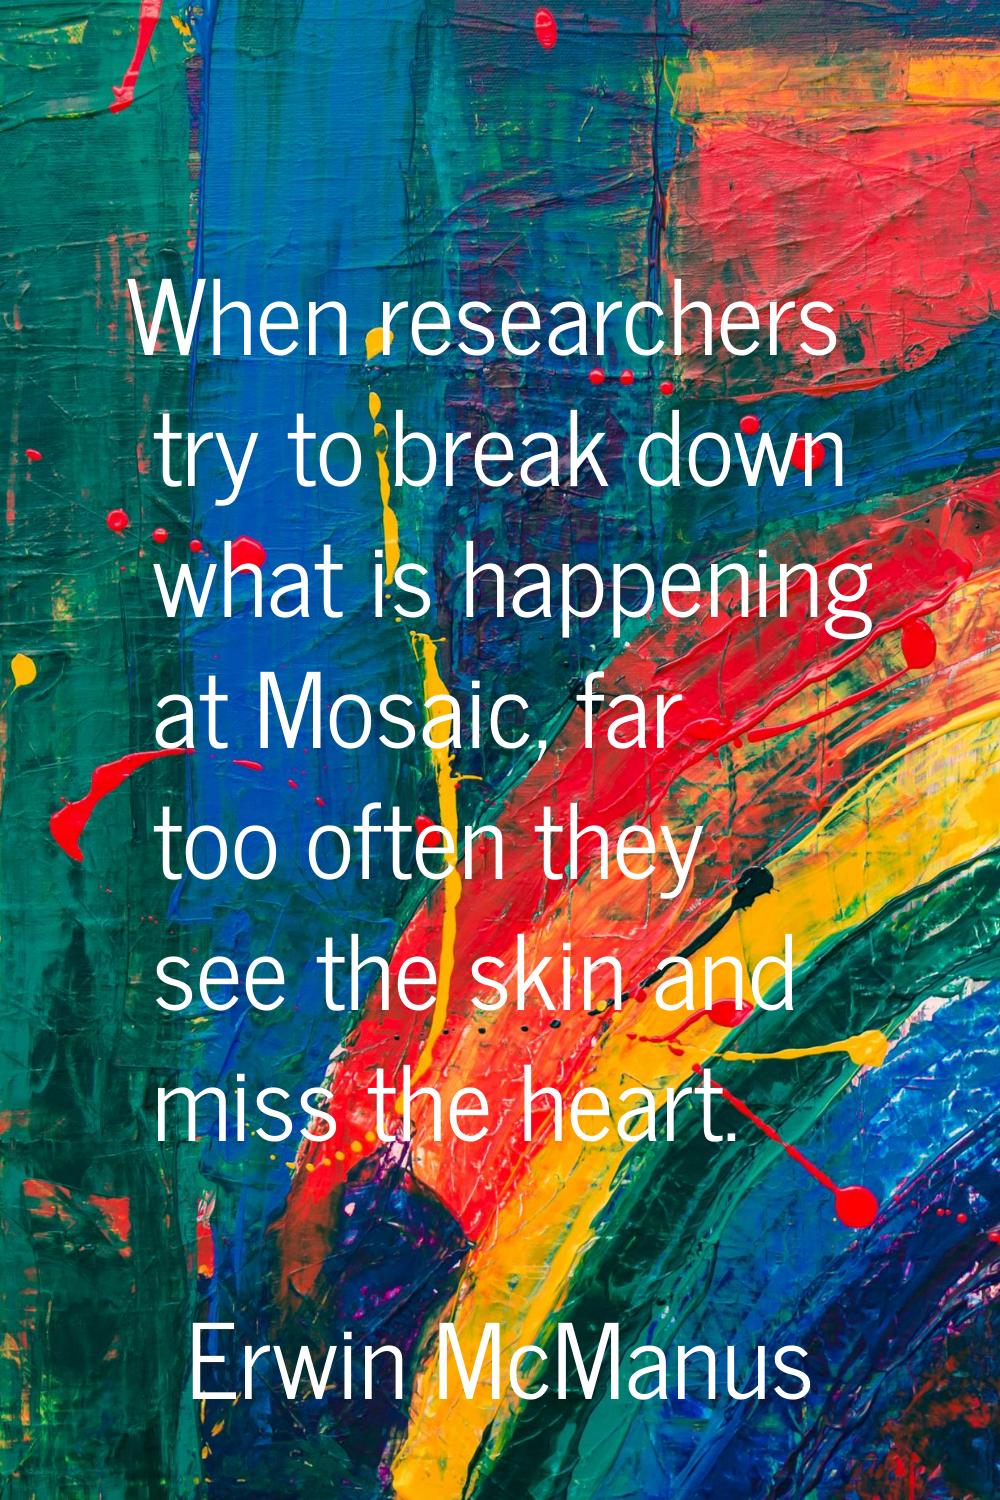 When researchers try to break down what is happening at Mosaic, far too often they see the skin and